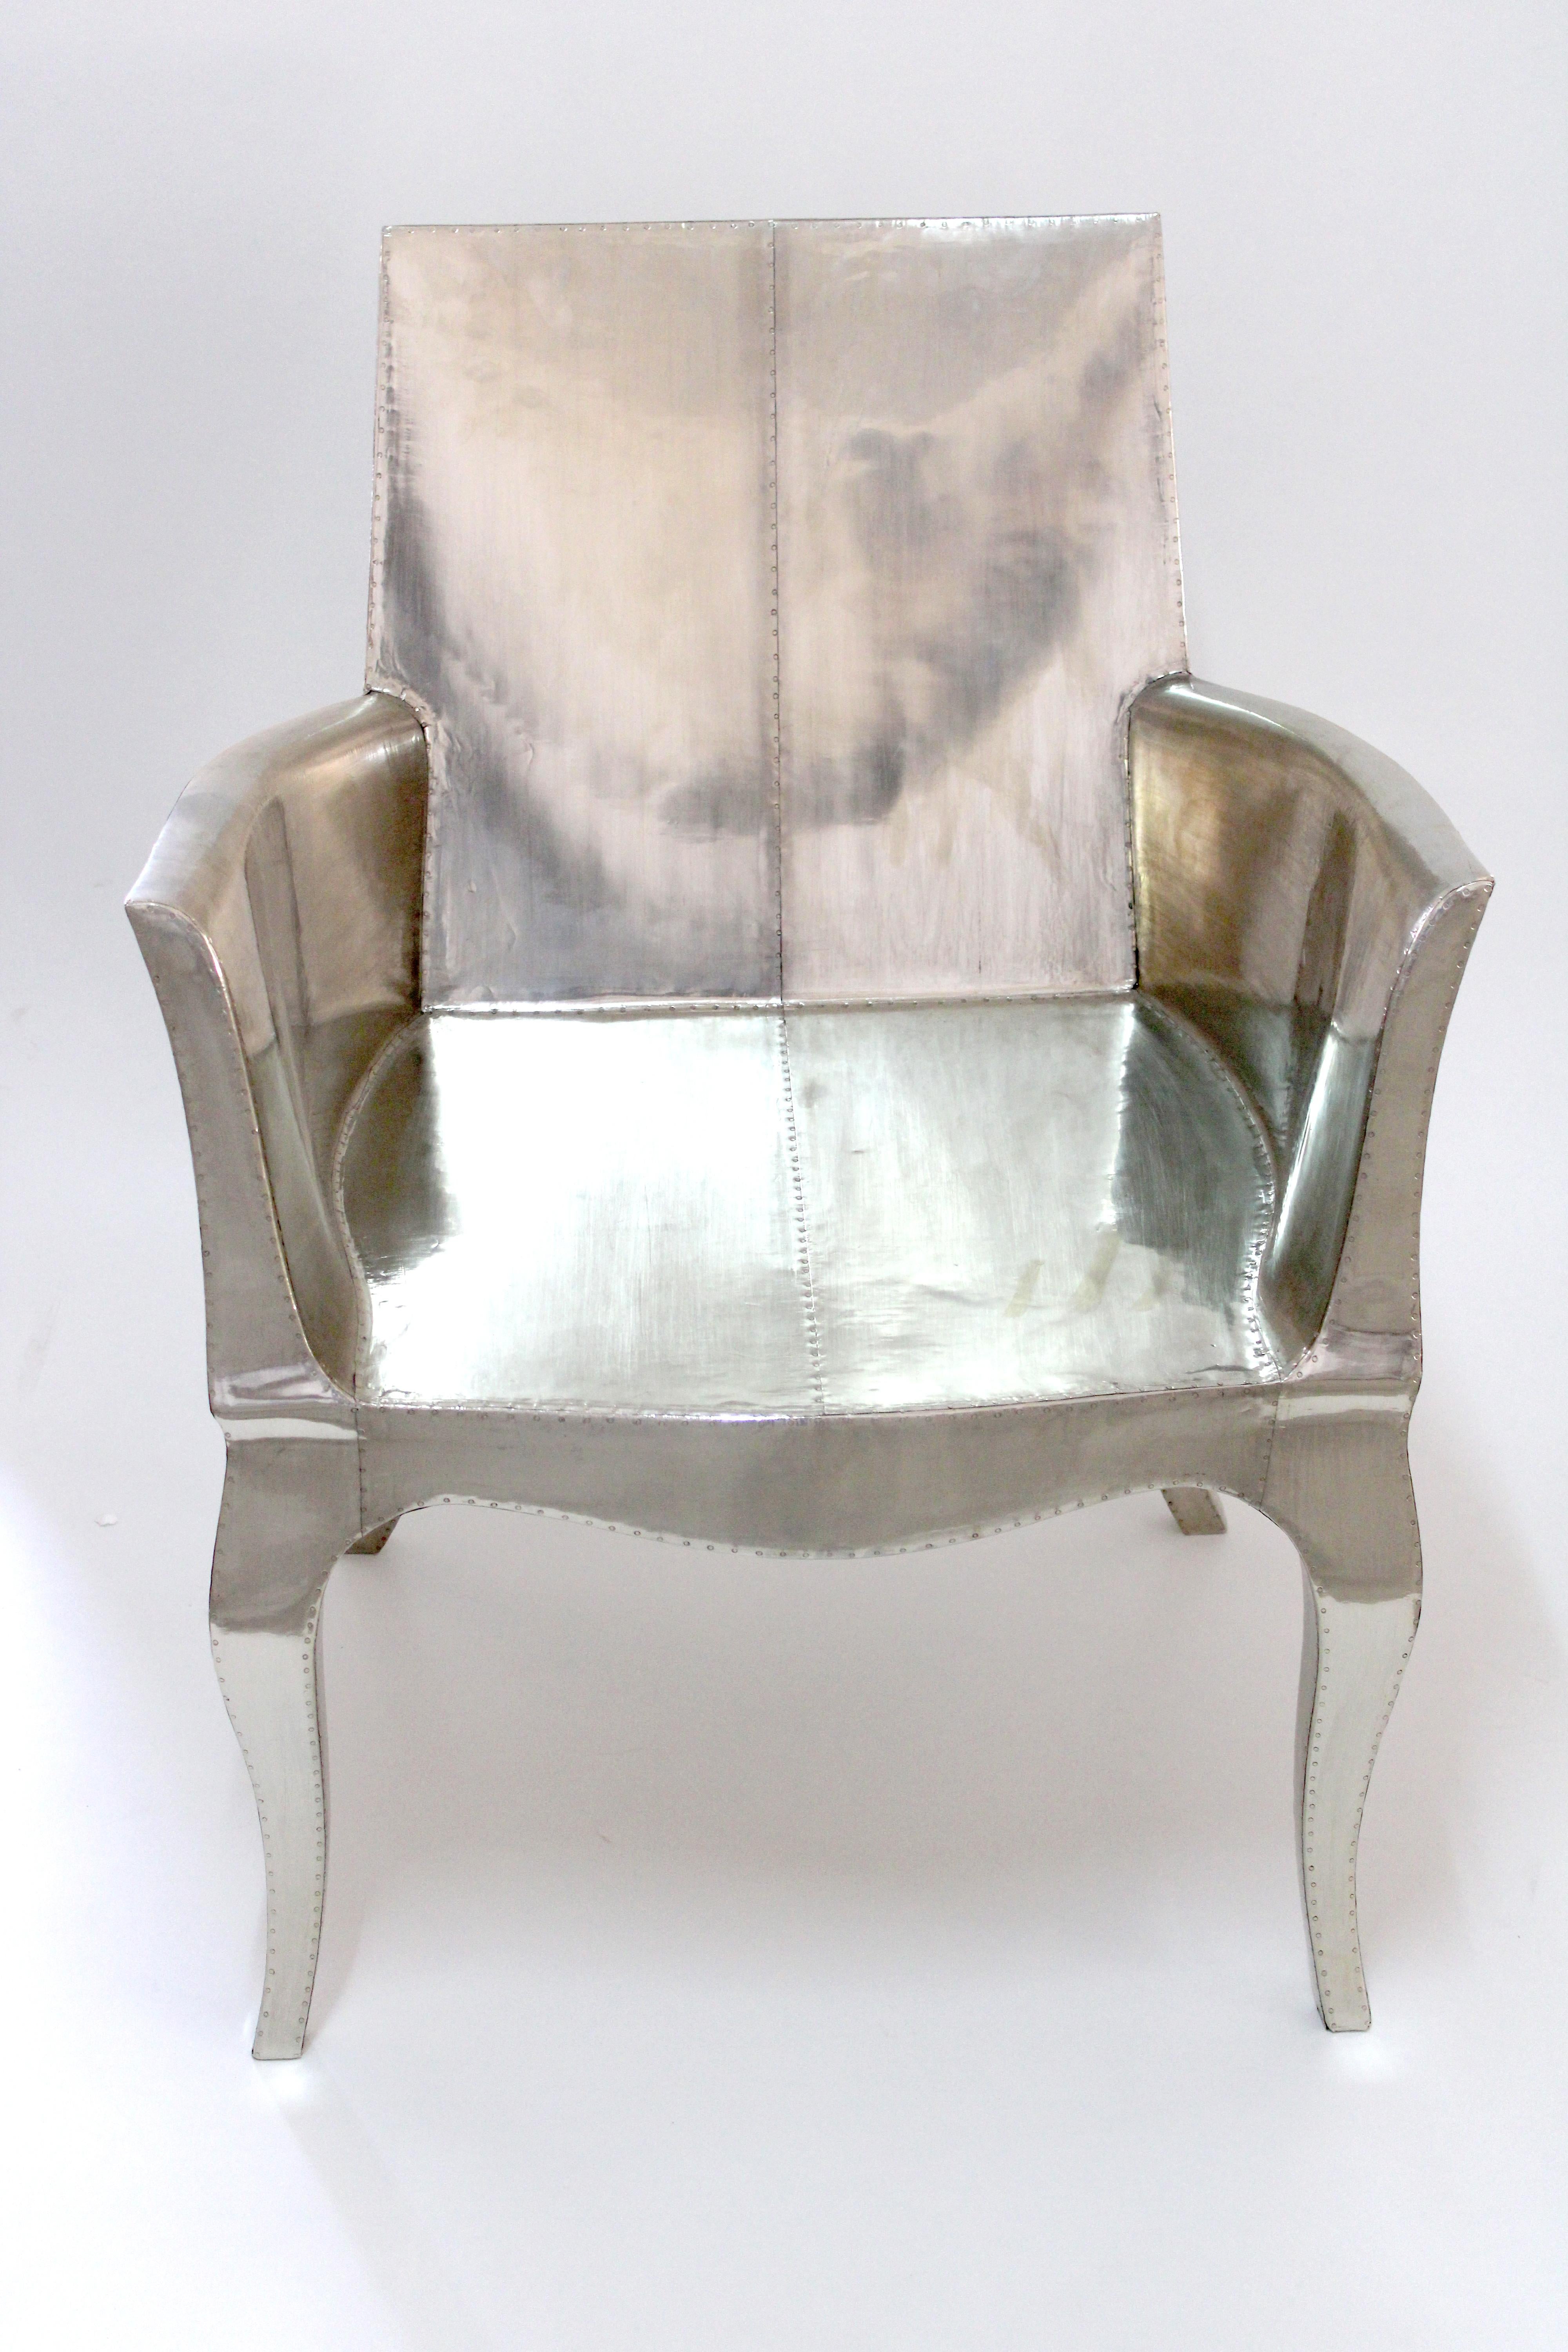 Contemporary Art Deco Armchairs Pair Designed by Paul Mathieu for Stephanie Odegard For Sale